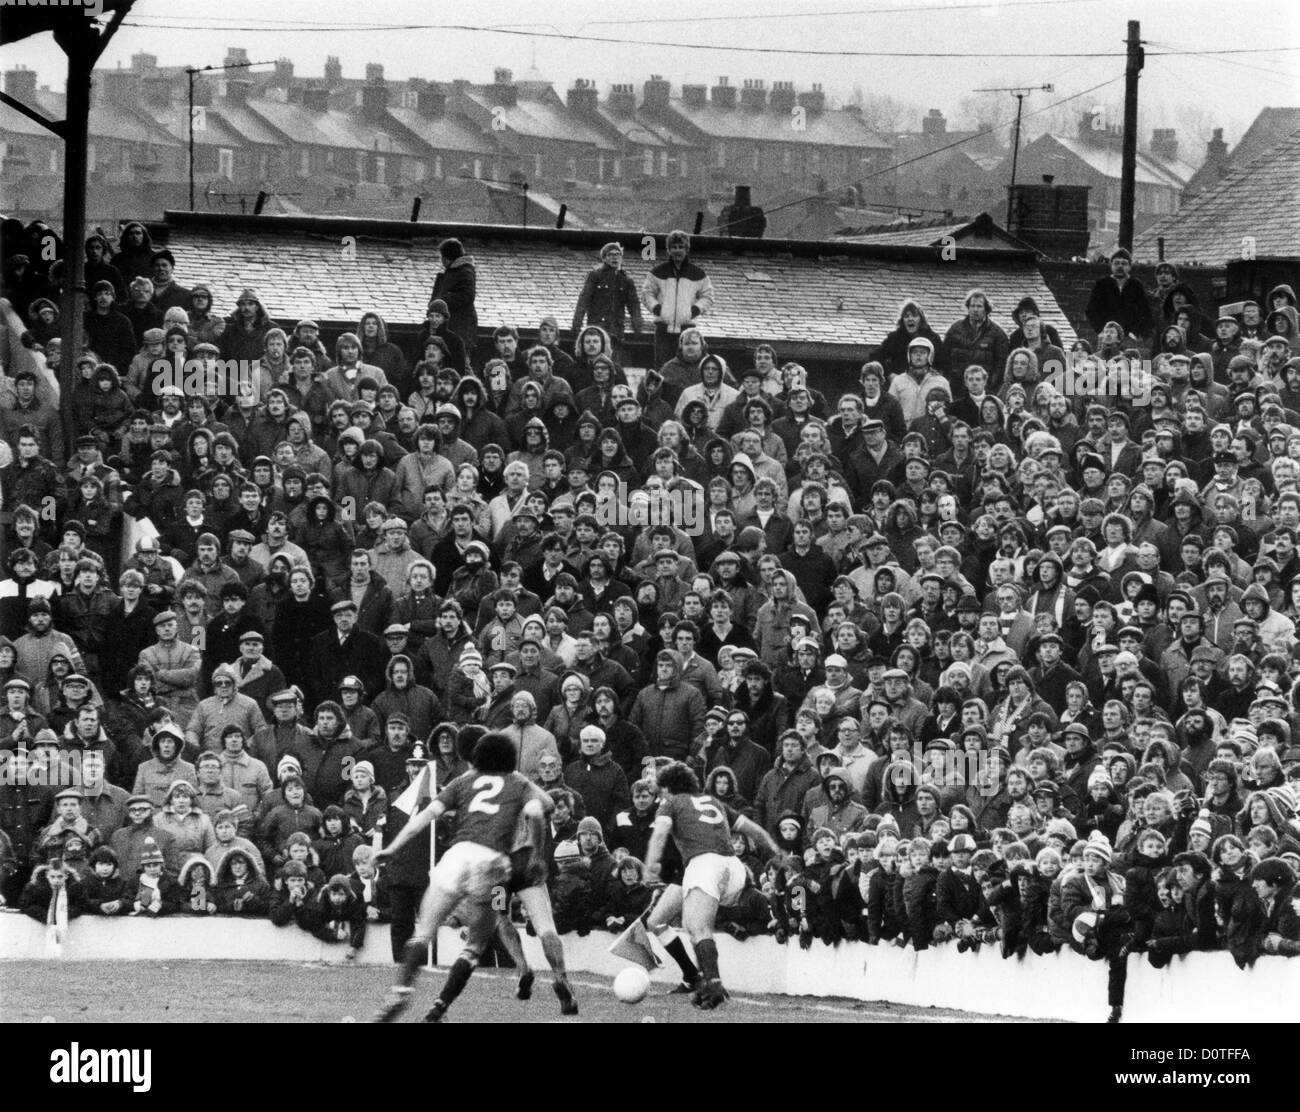 Football crowd watching Barnsley v Wolverhampton Wanderers at Oakwell 5th February 1983 PICTURE BY DAVID BAGNALL. crowds spectators fans supporters Britain 1980s football match game Stock Photo